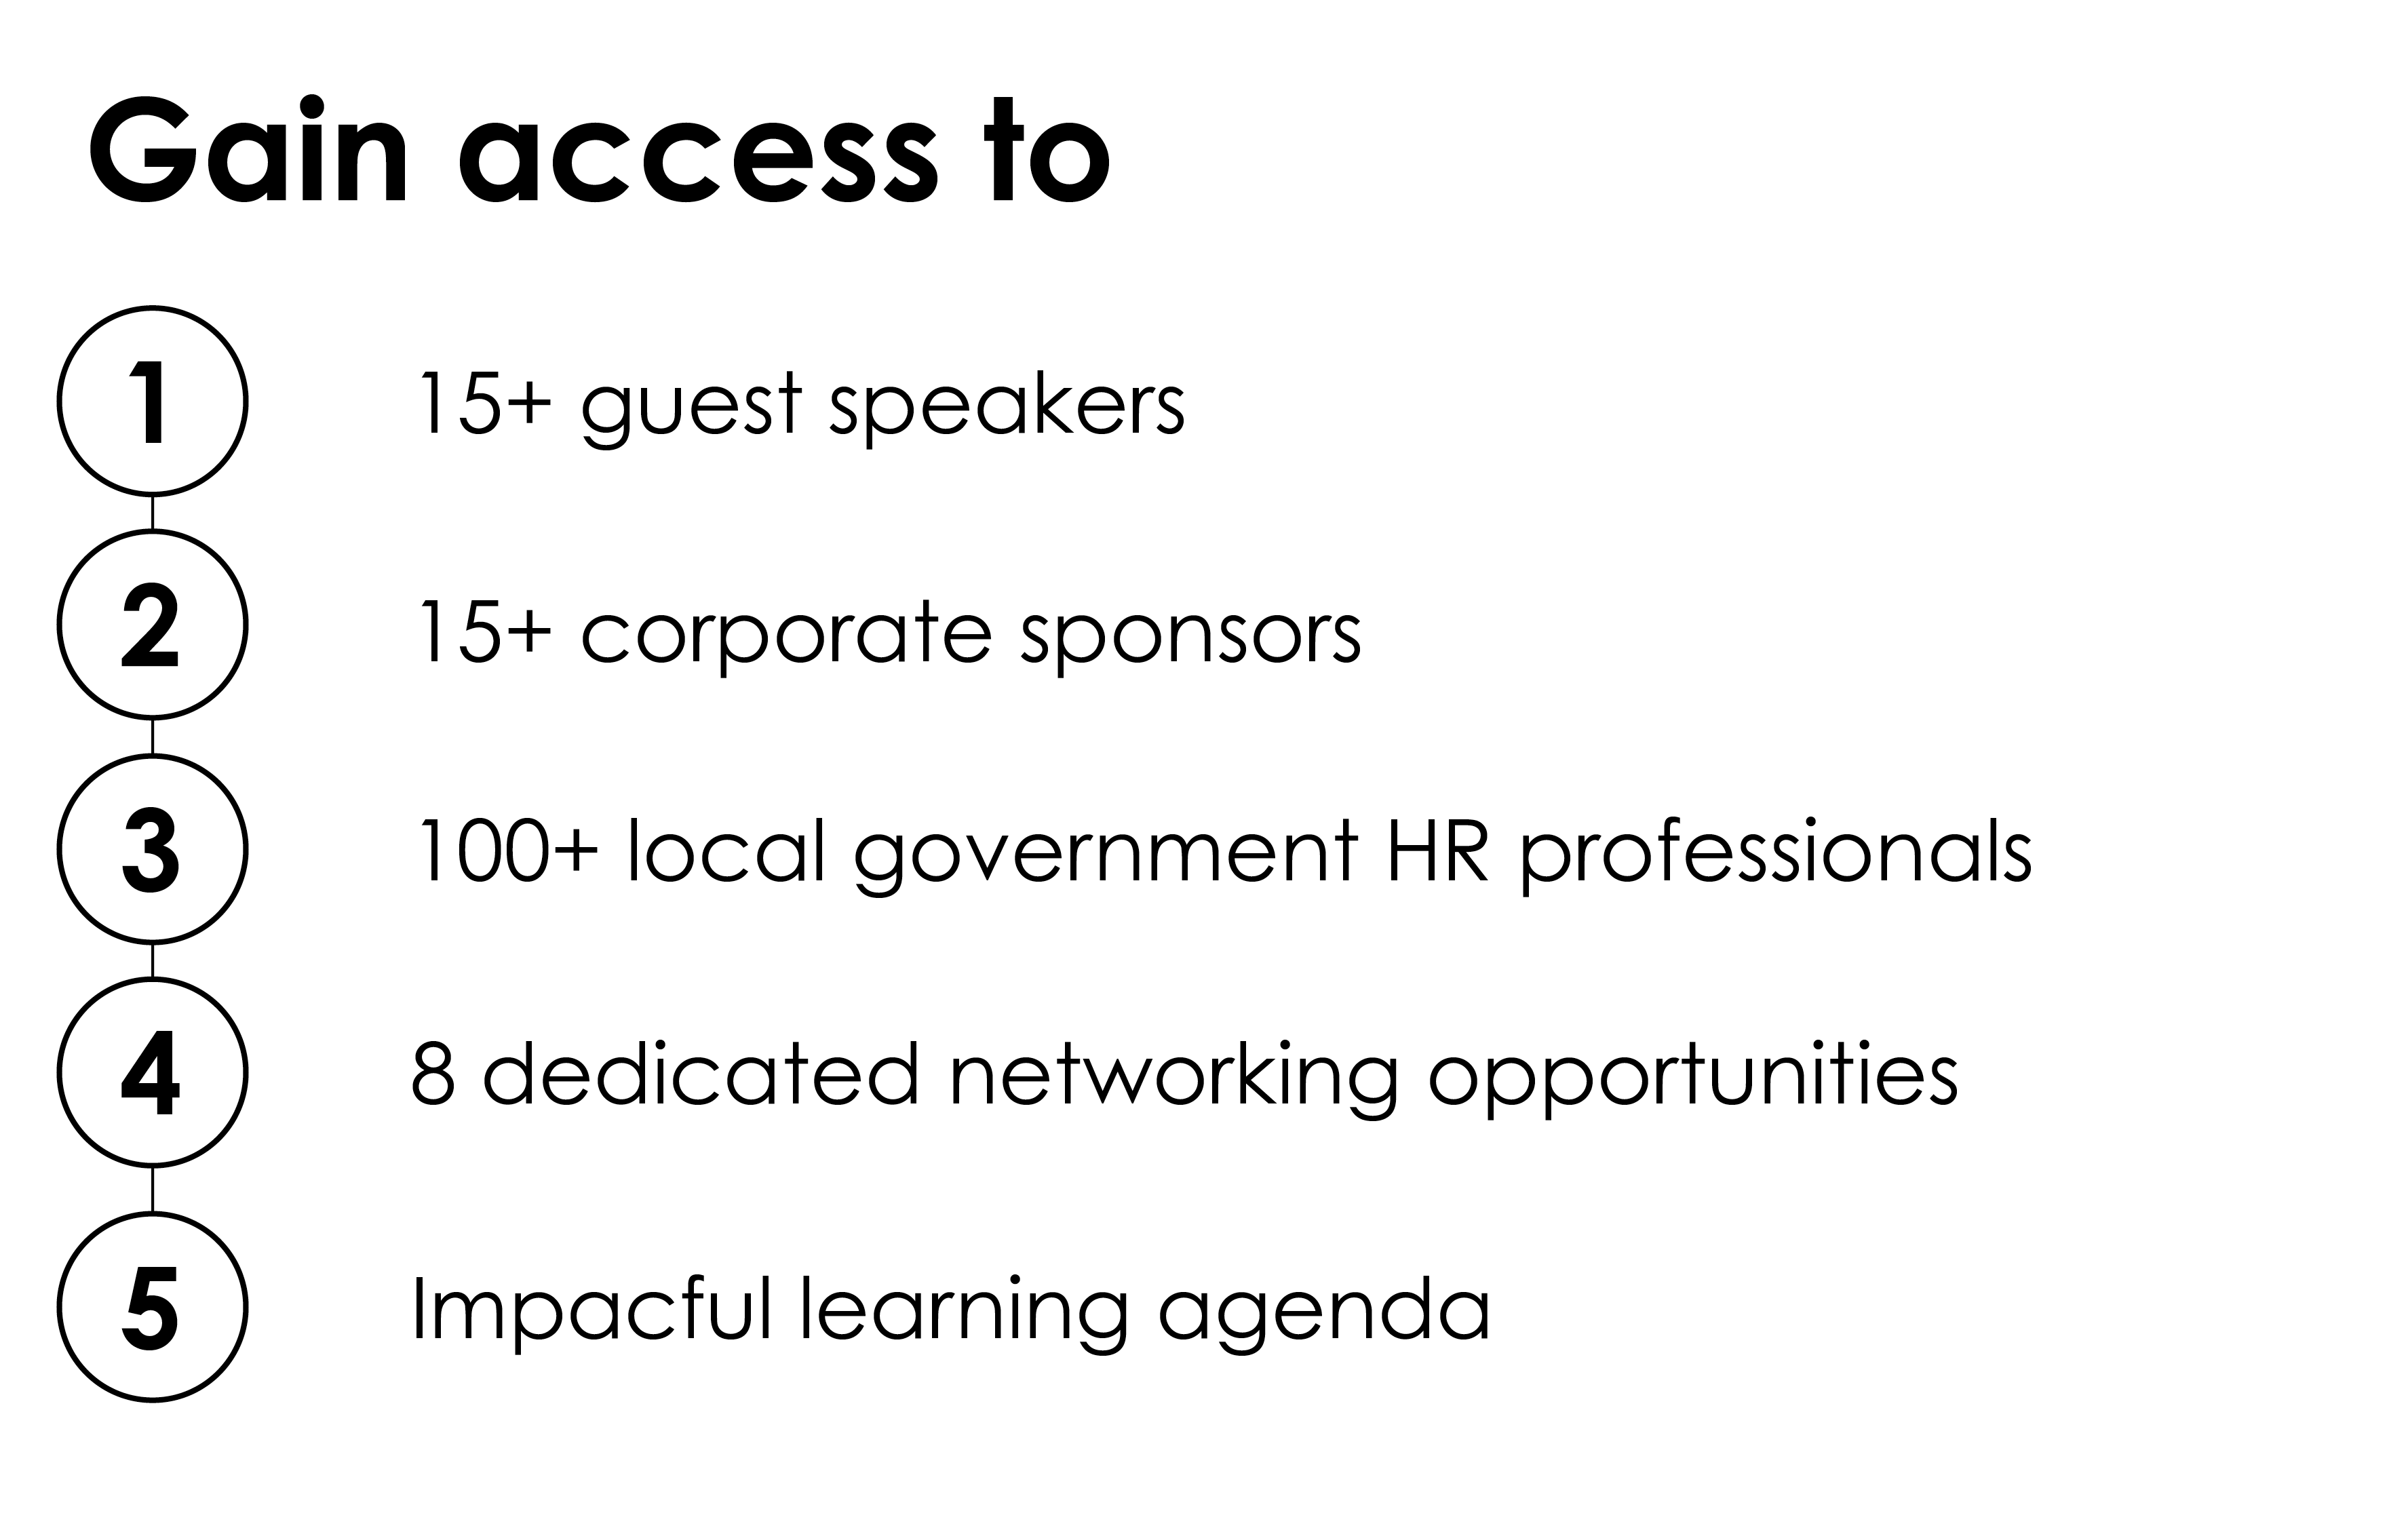 An image with five bullet points about why people should attend the event.